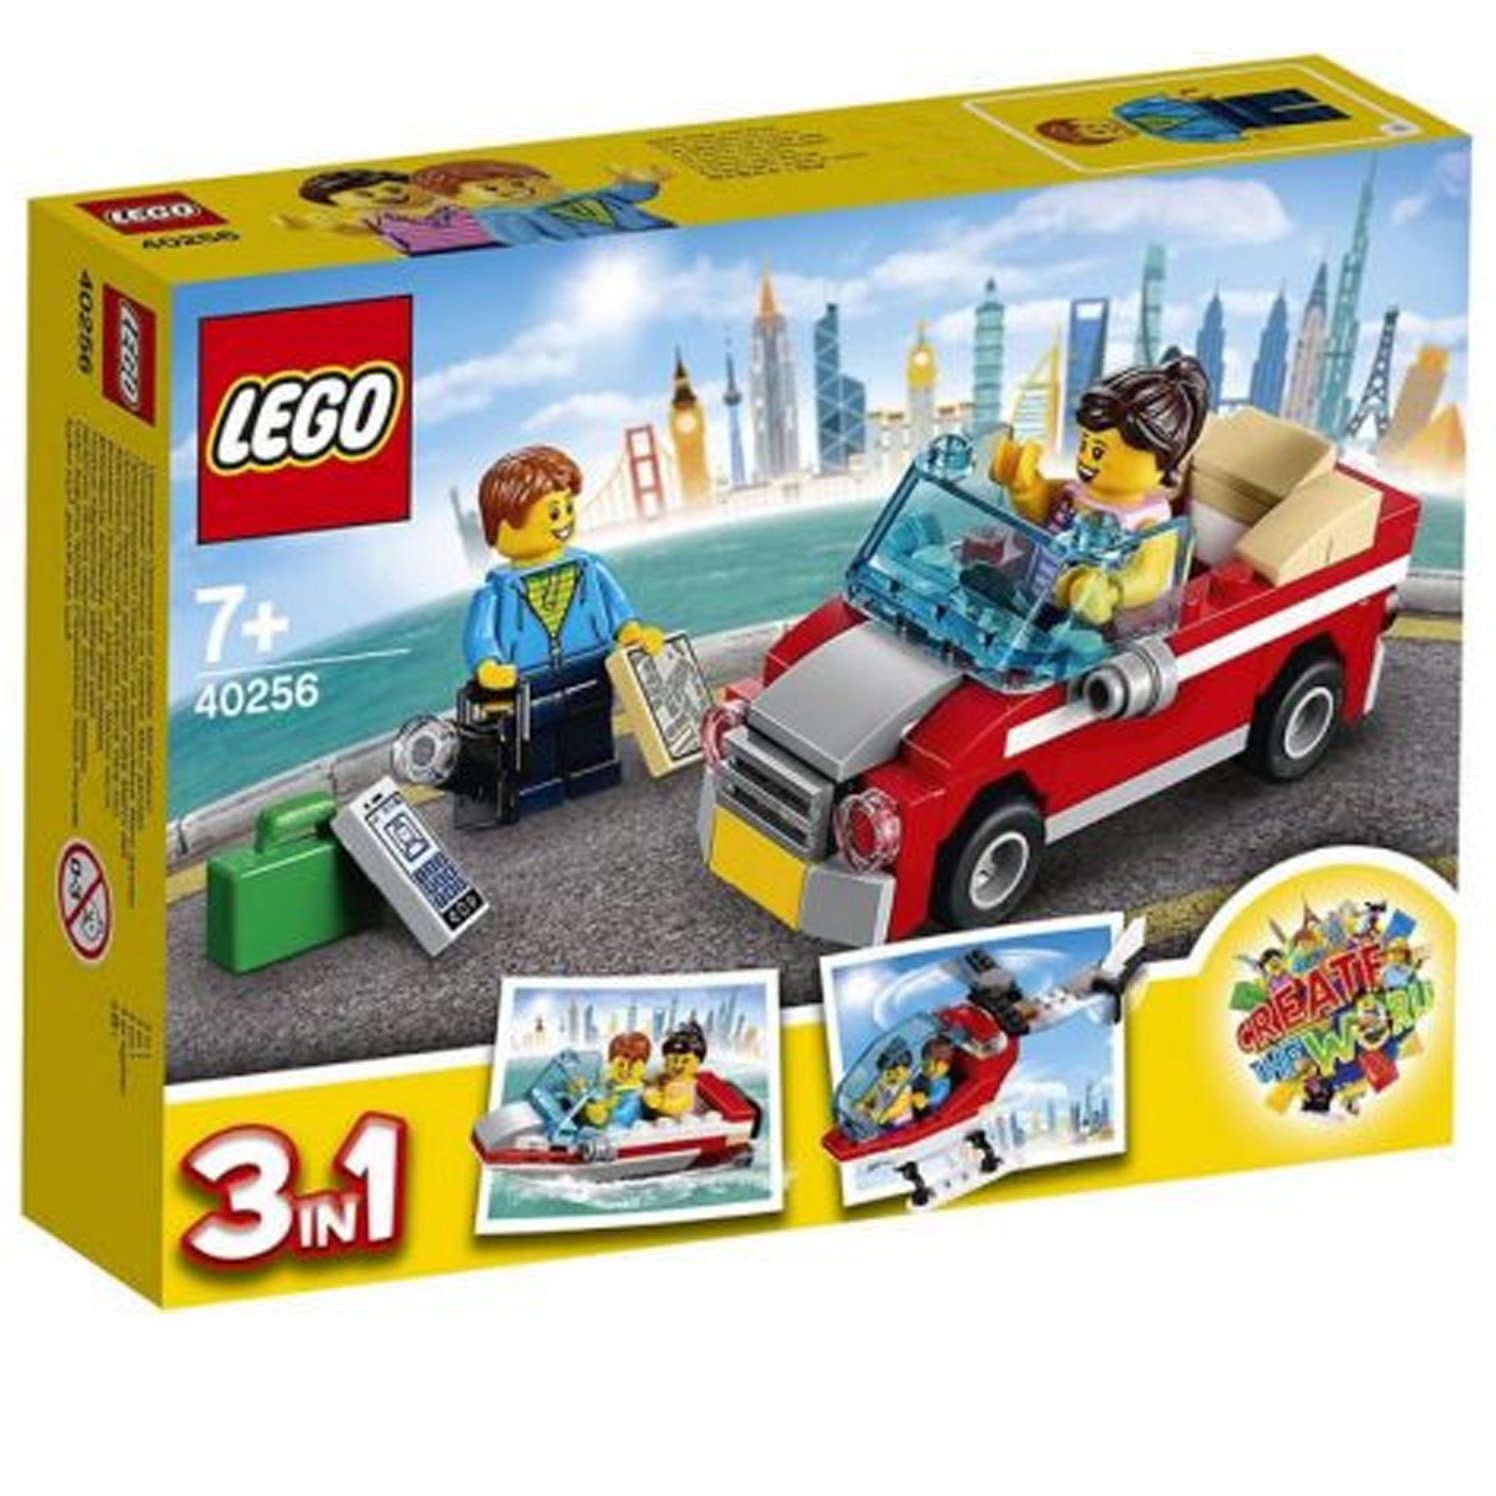 "Exclusive Lego 42056 Create The World...